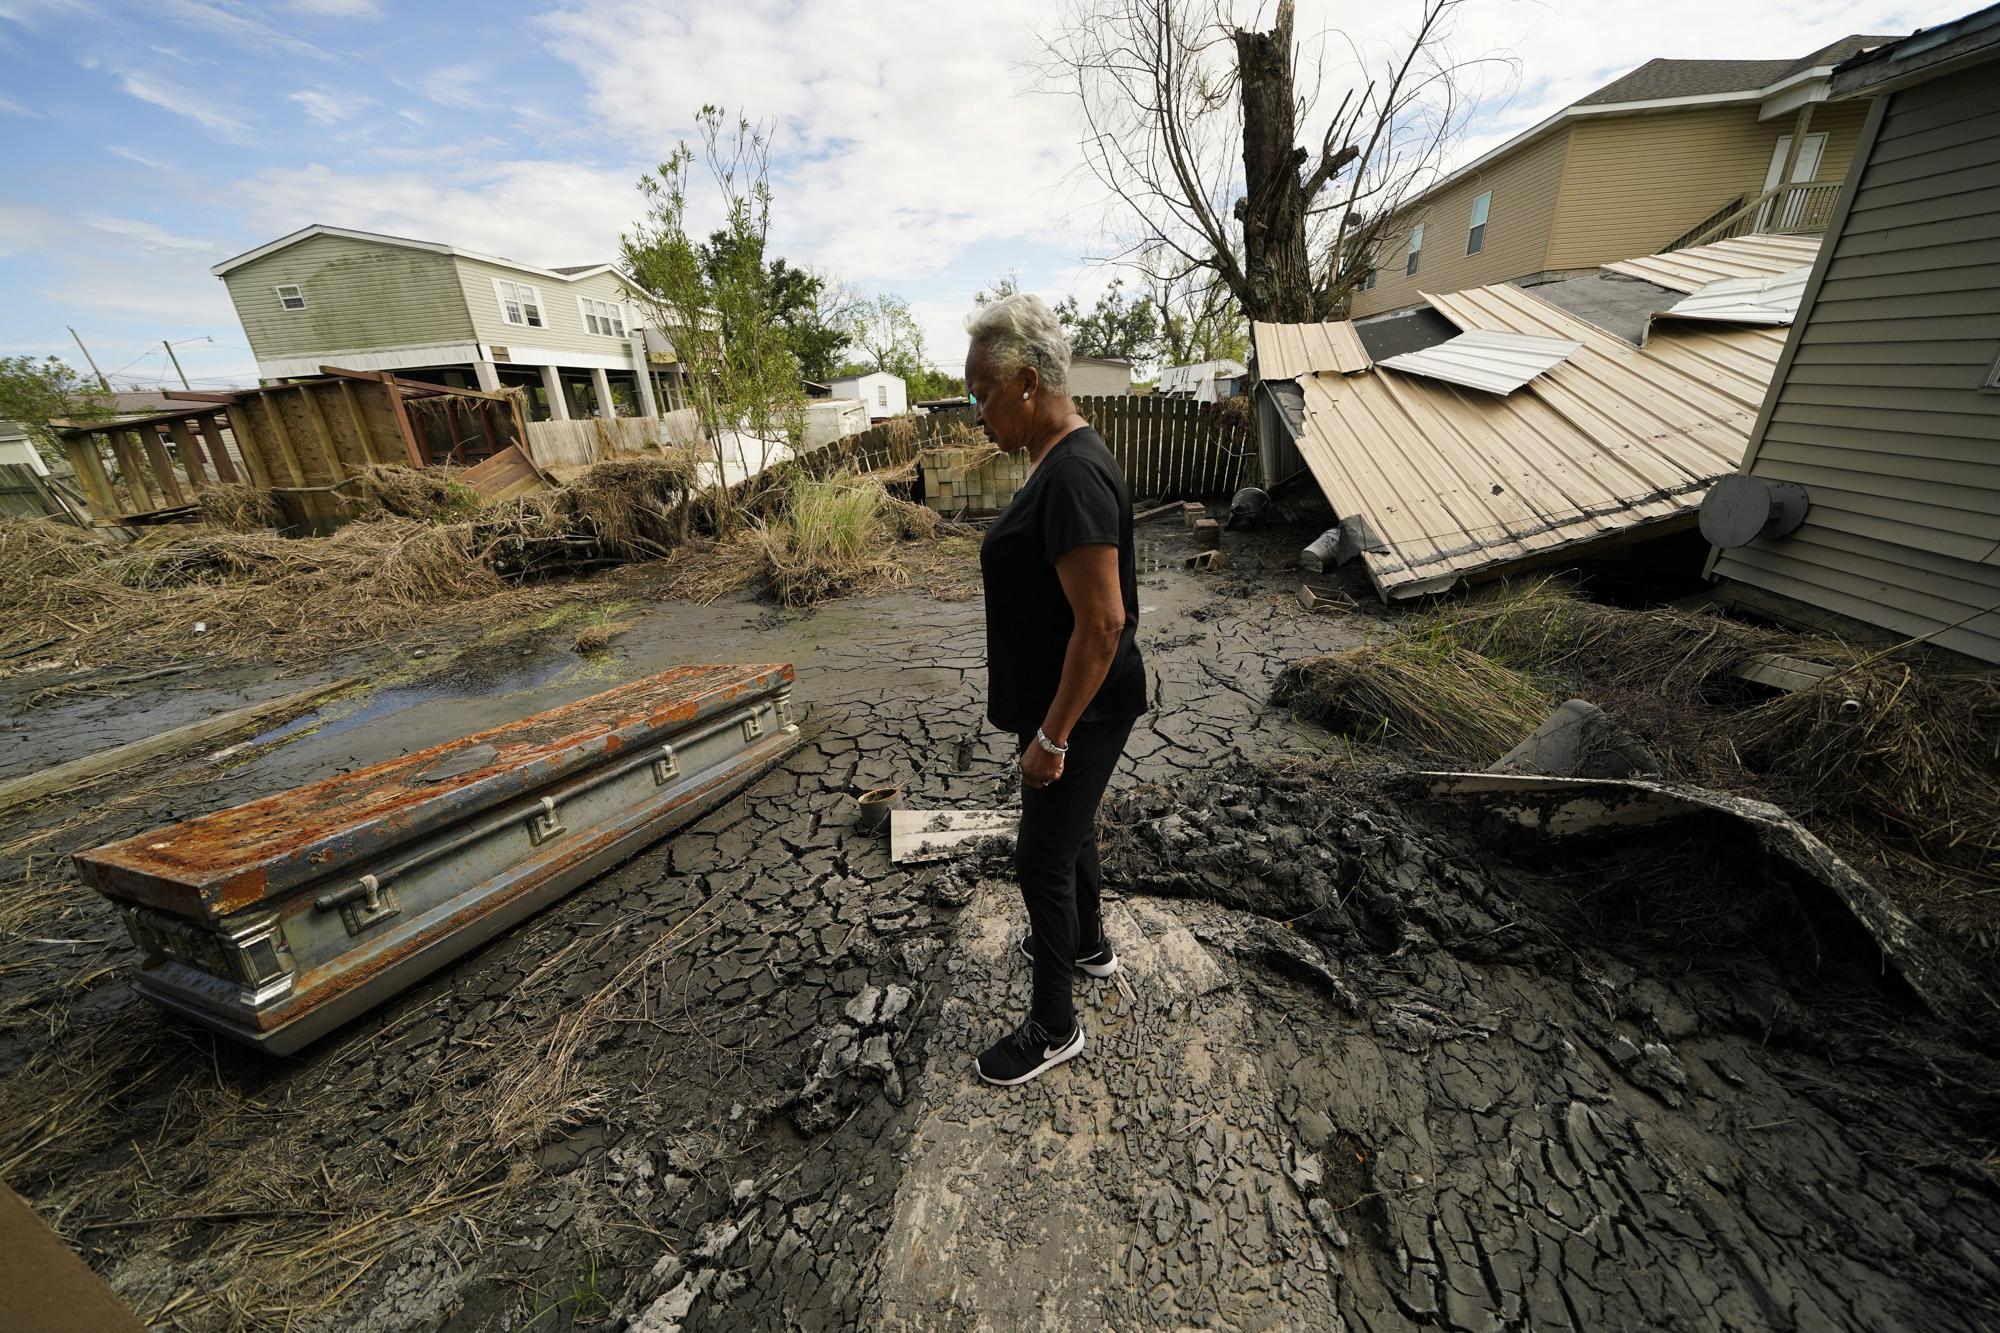 A Month After Hurricane Ida, Some Communities in Louisiana are Still Struggling